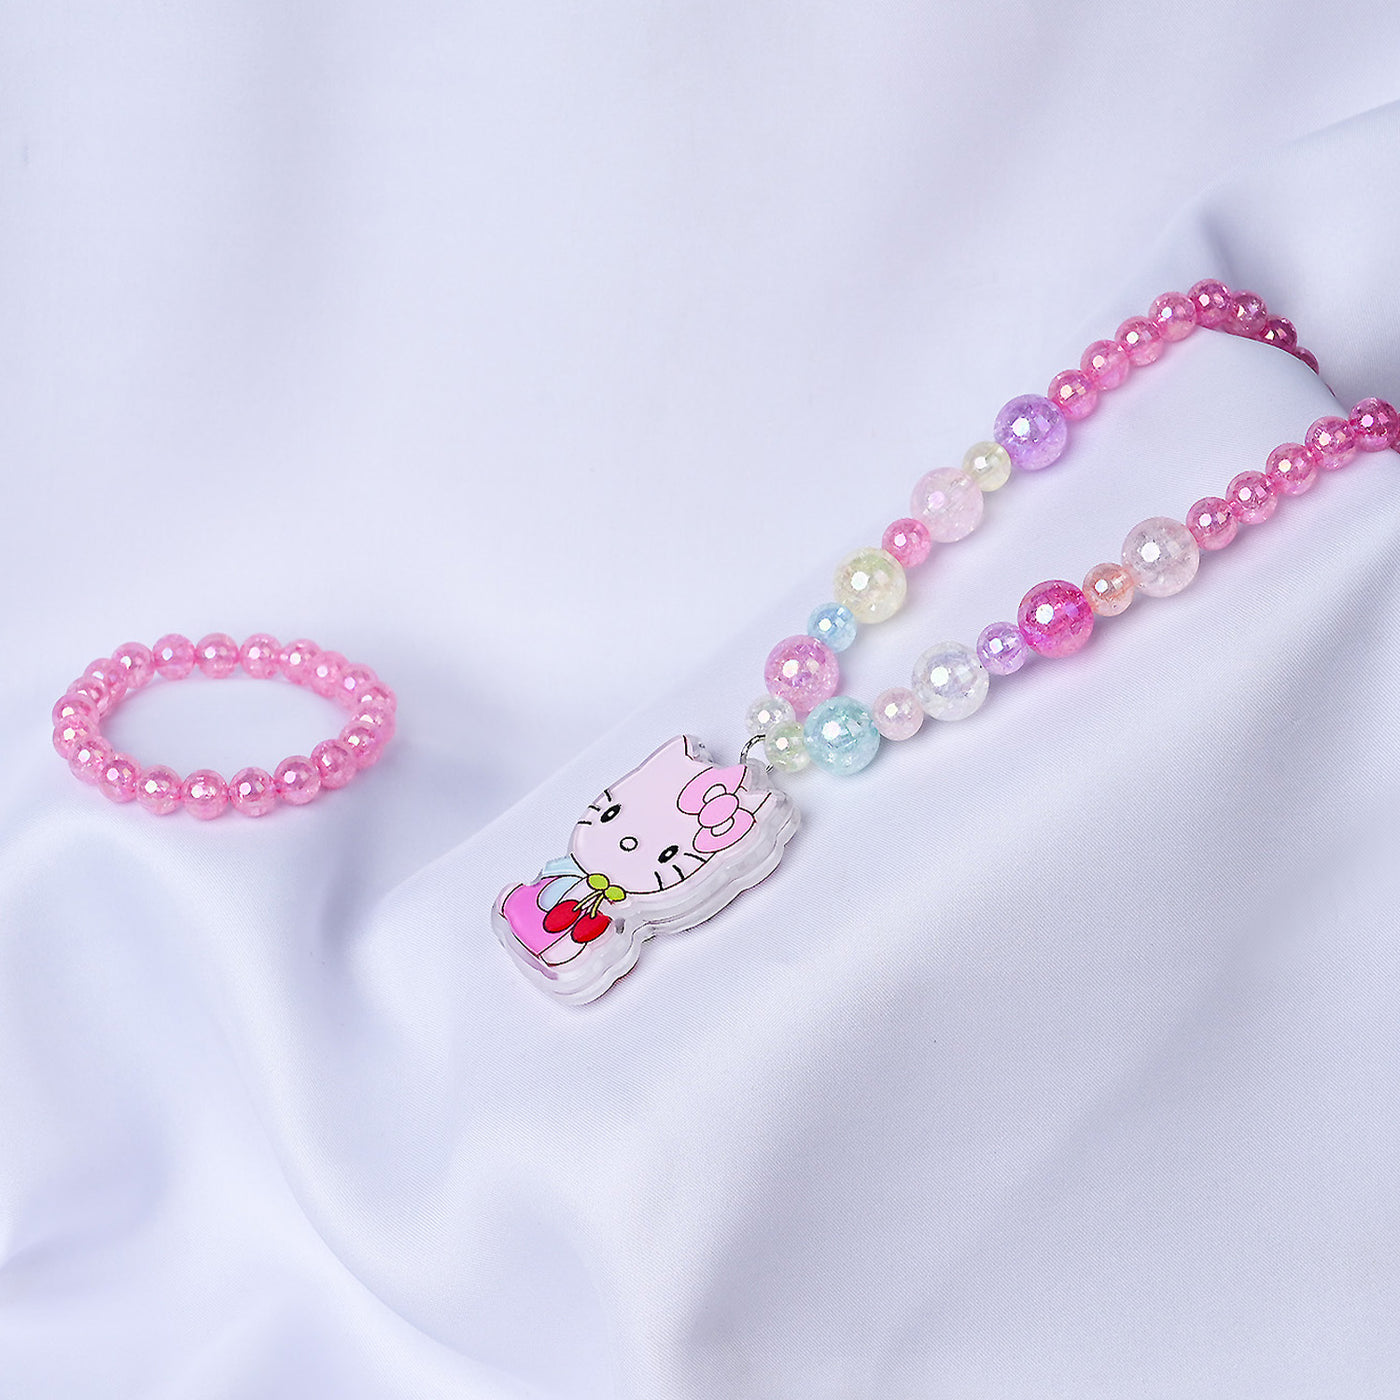 NECKLACE AND BRACELET FOR BABY GIRL